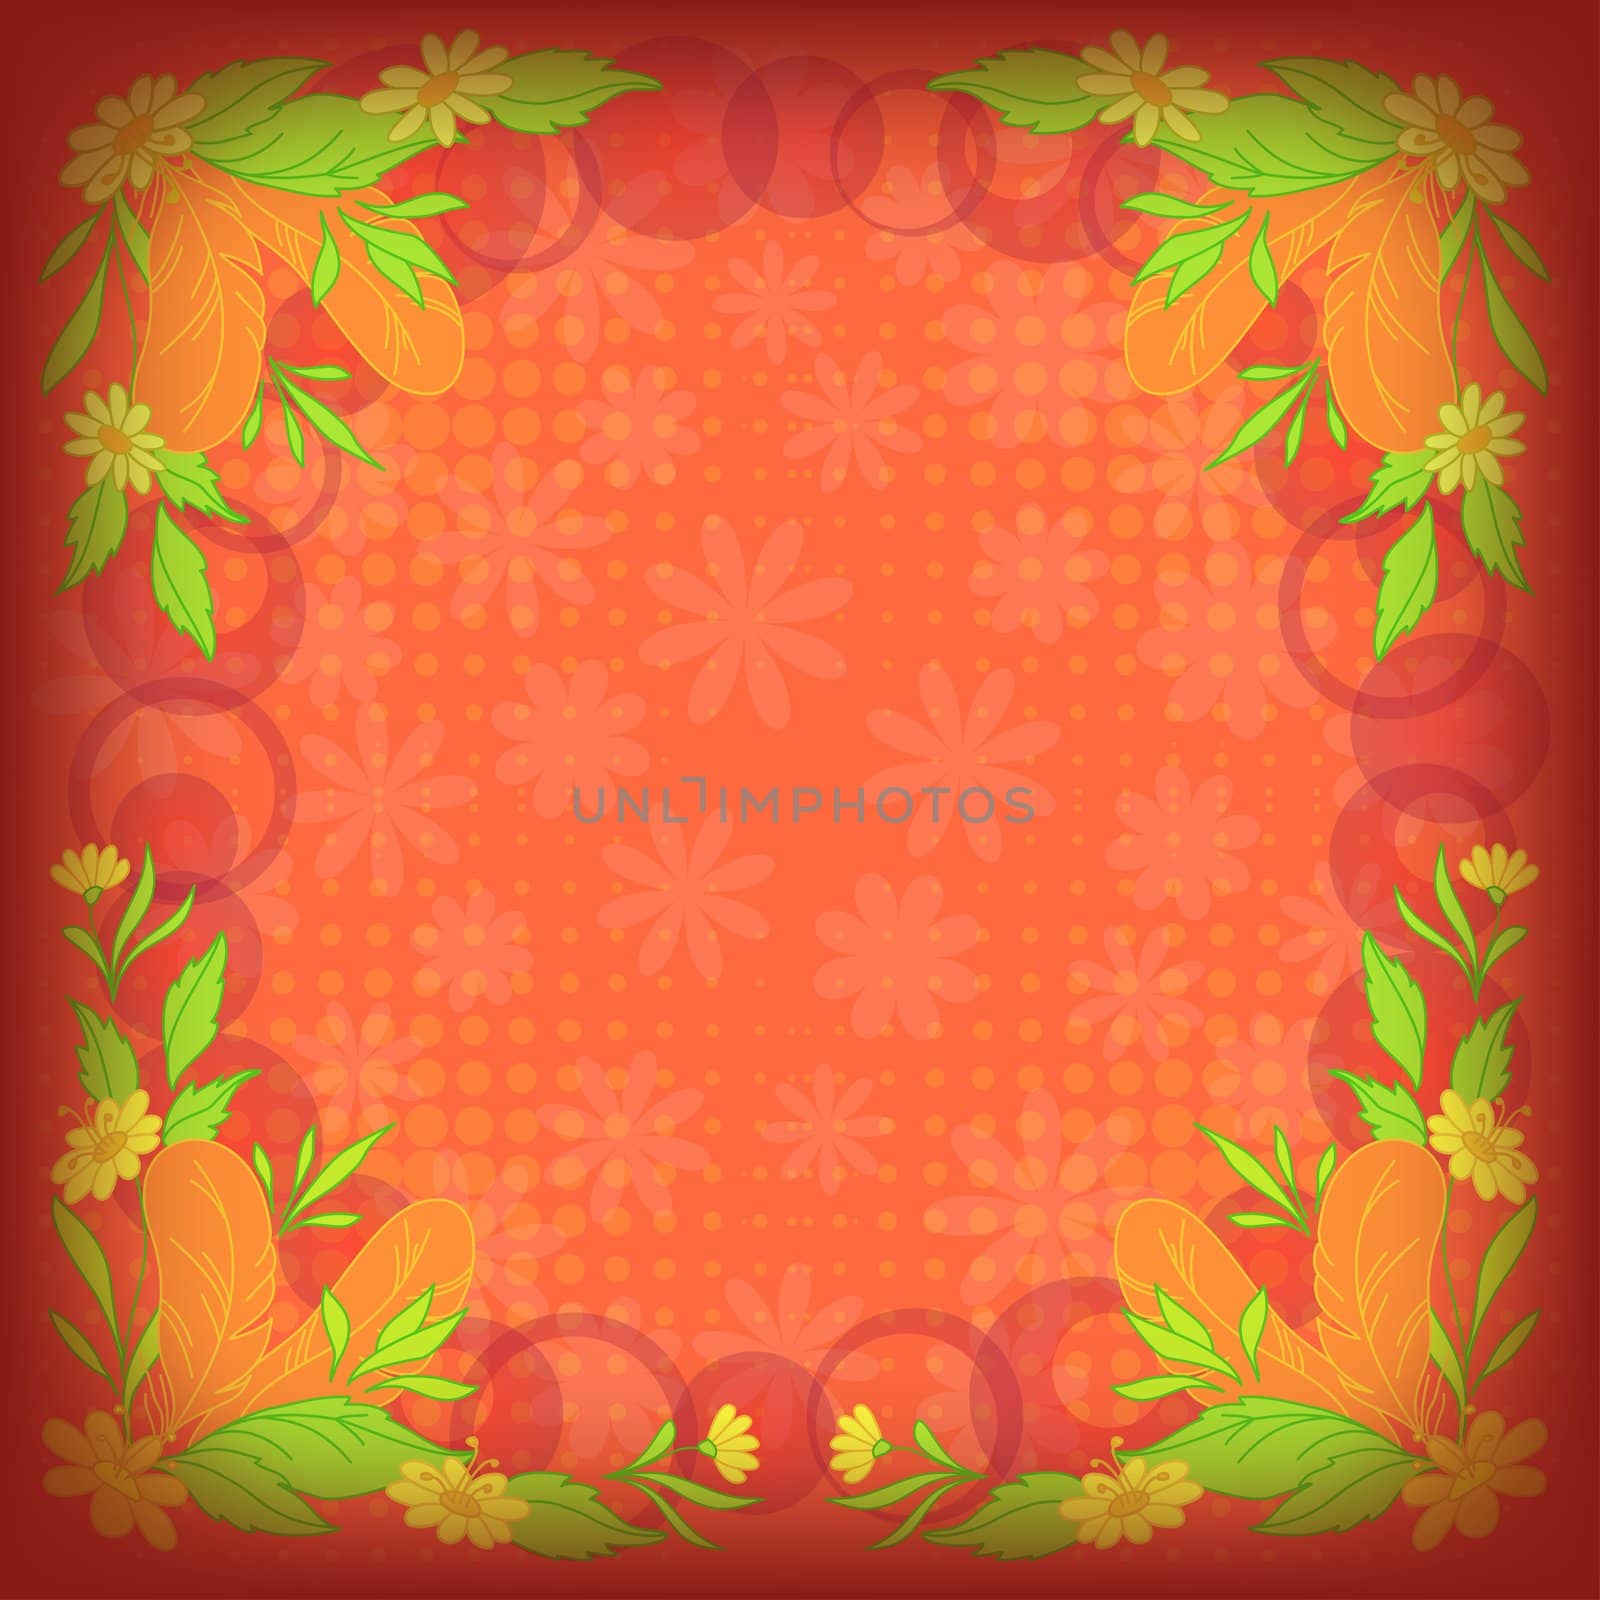 Abstract floral background: leaves, flowers, feathers and circles on red